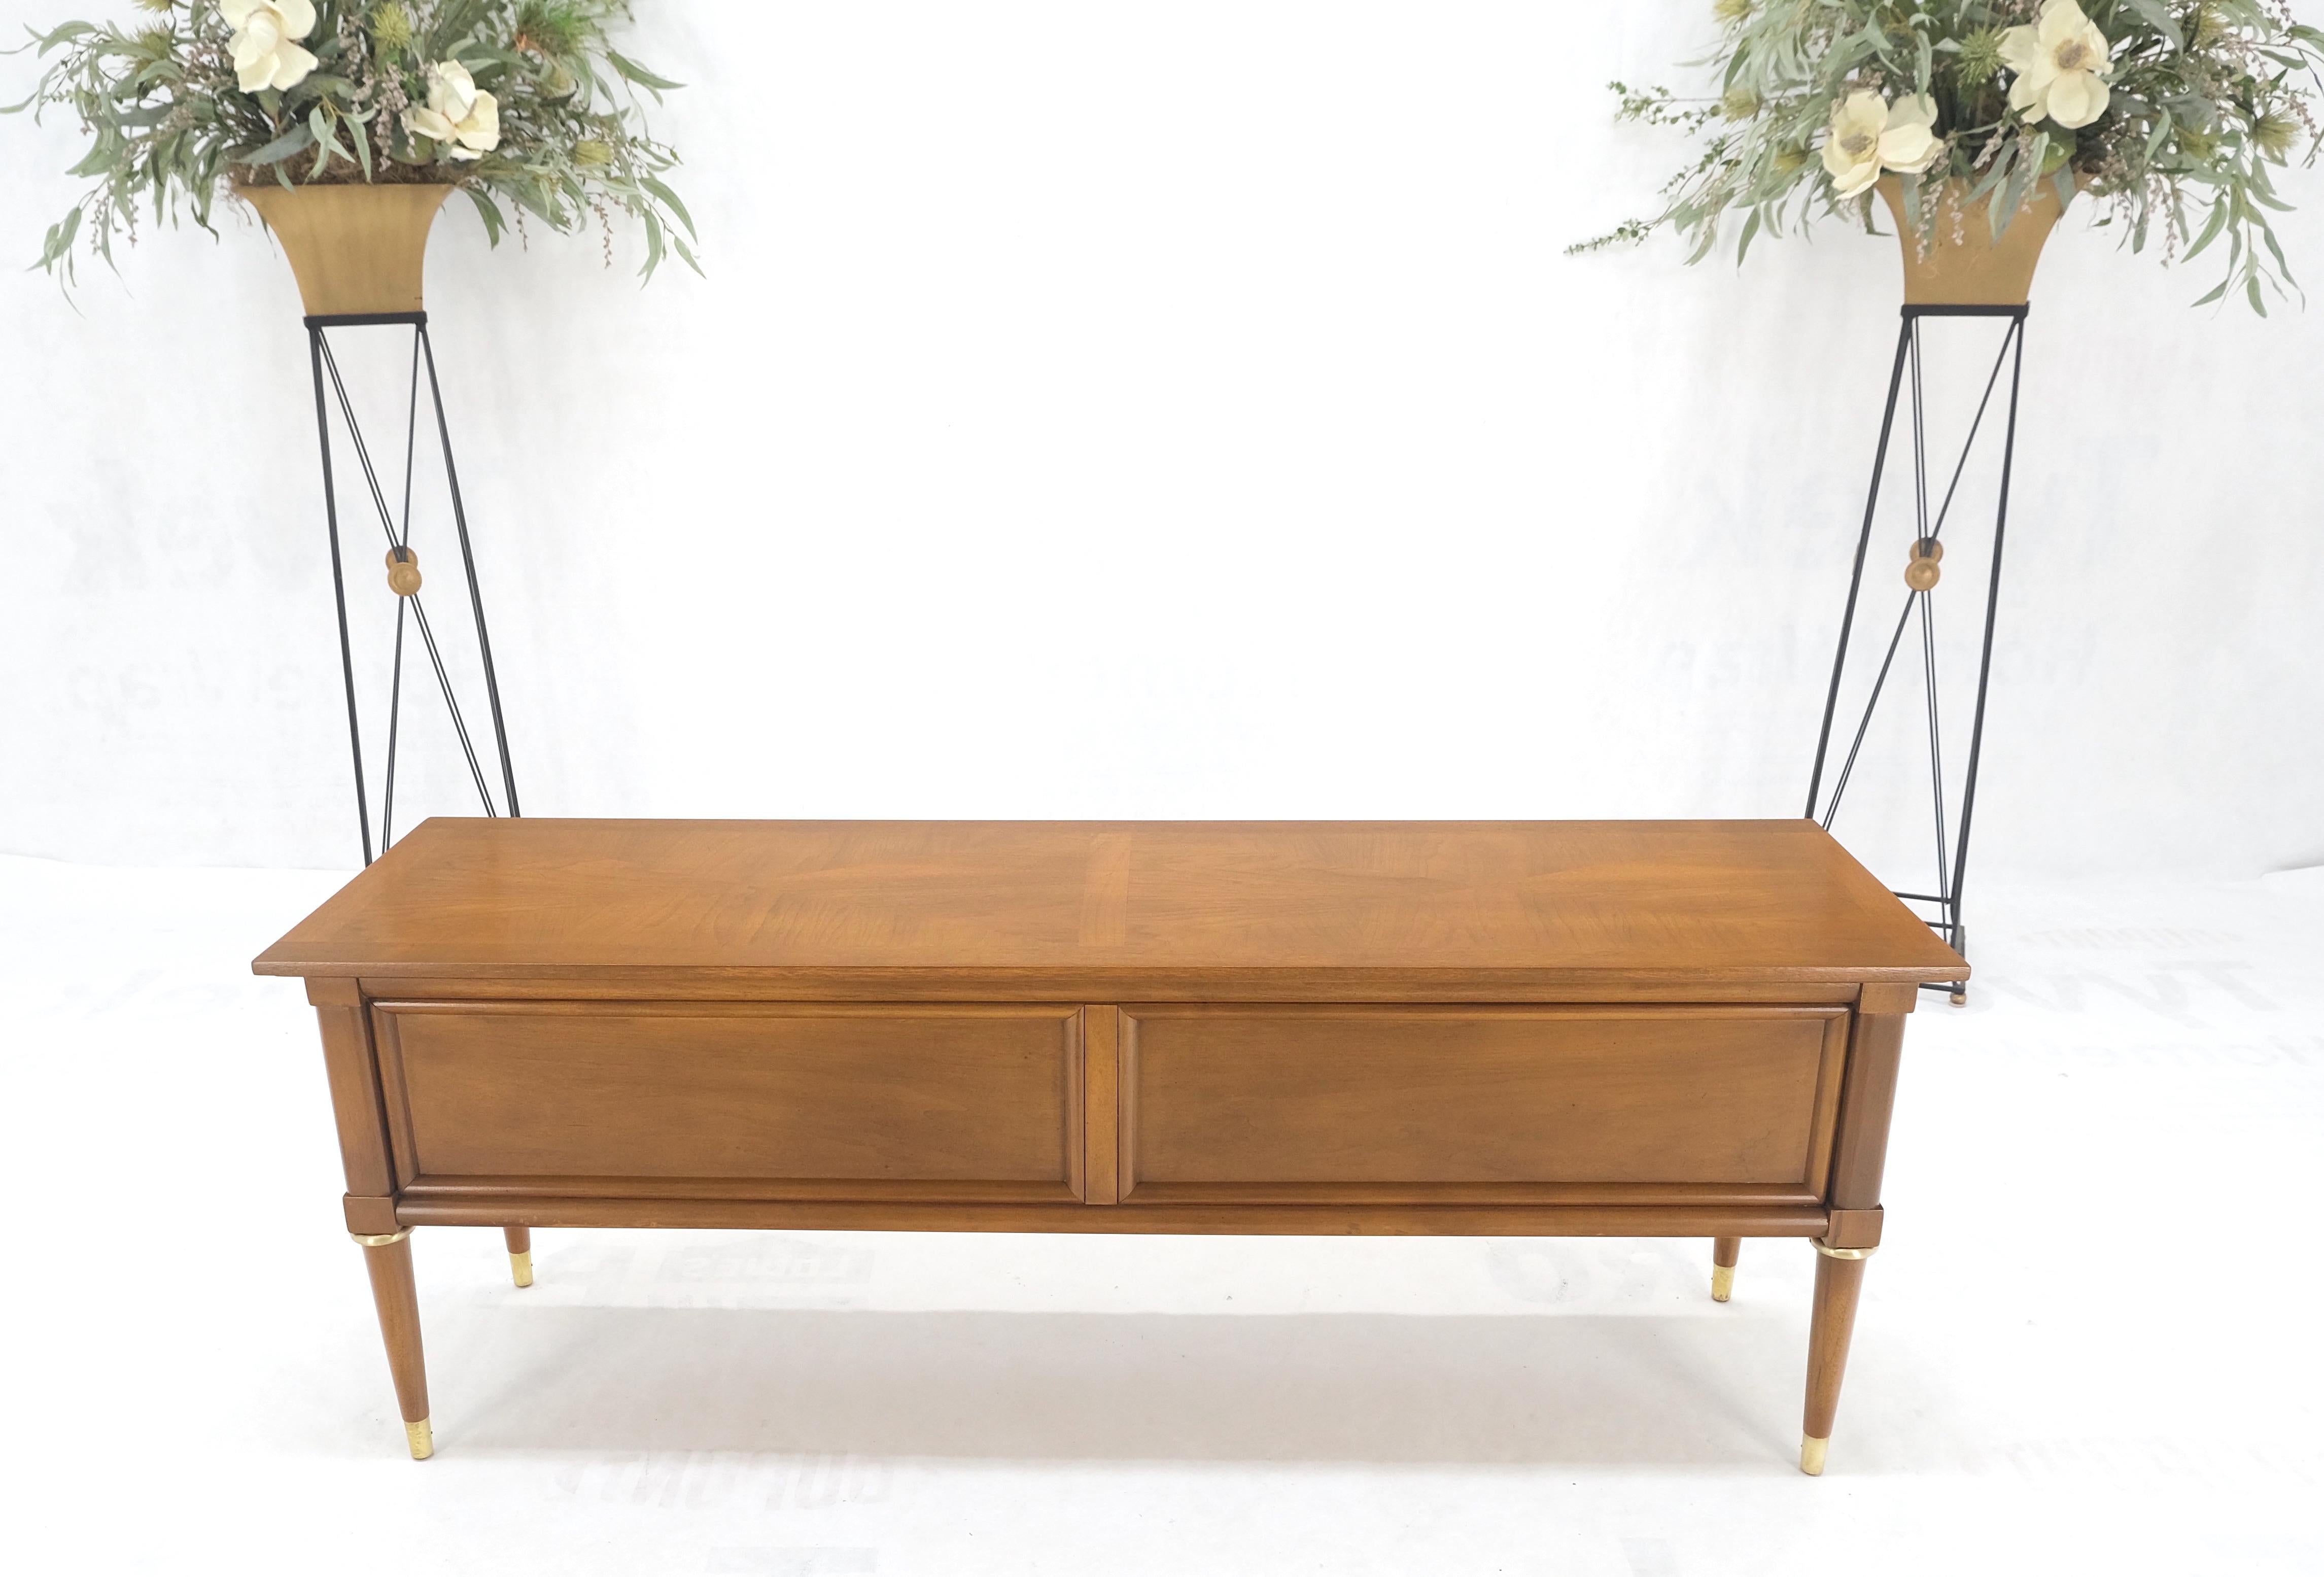 Messing Drop Rings Pulls Low Profile Tapered Legs Long Credenza Mid Century MINT! im Angebot 1